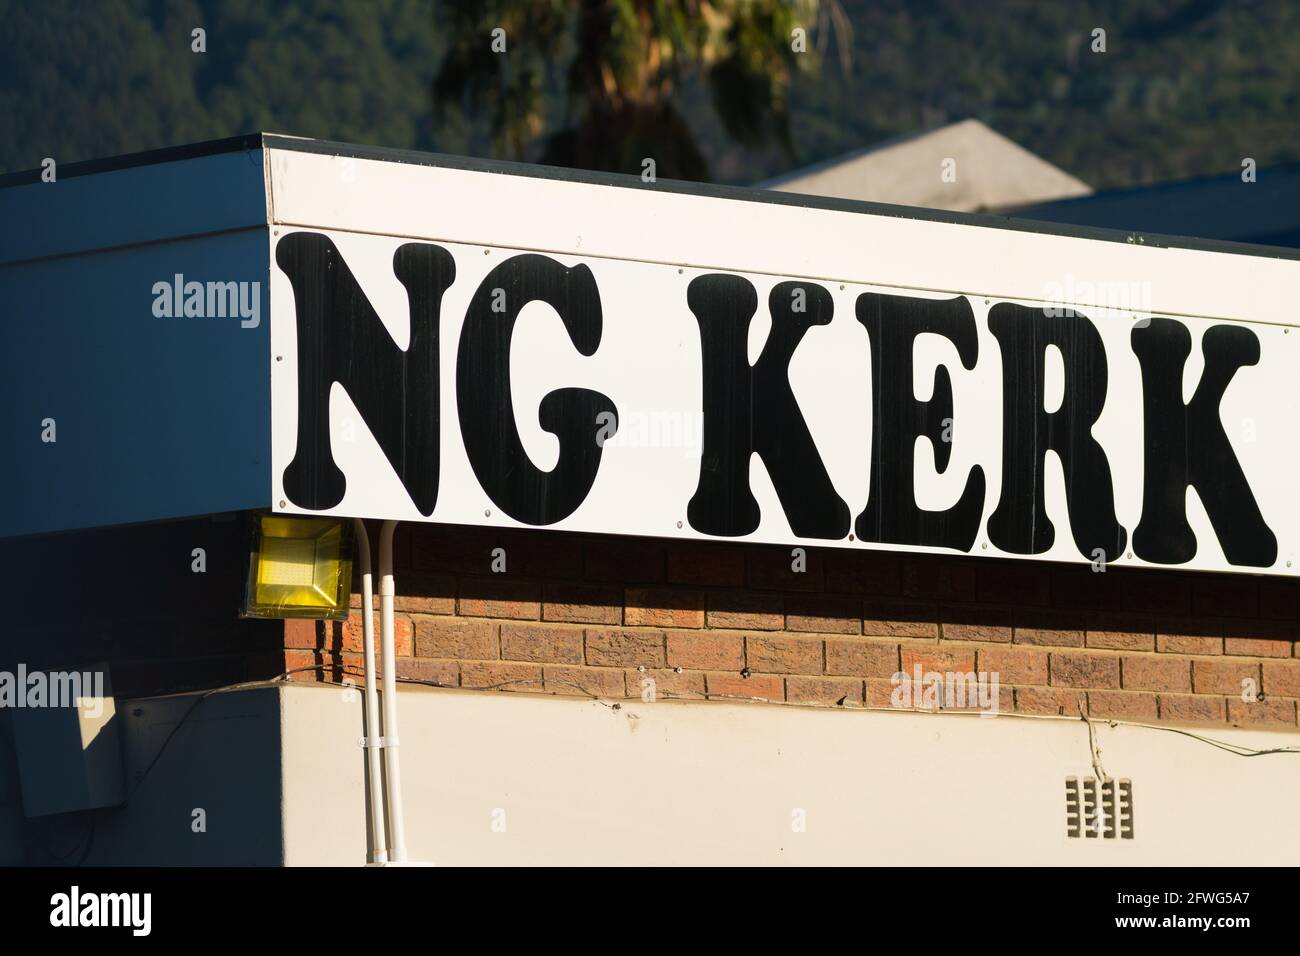 N G Kerk sign and banner on a building concept South African religion in Afrikaans culture Stock Photo